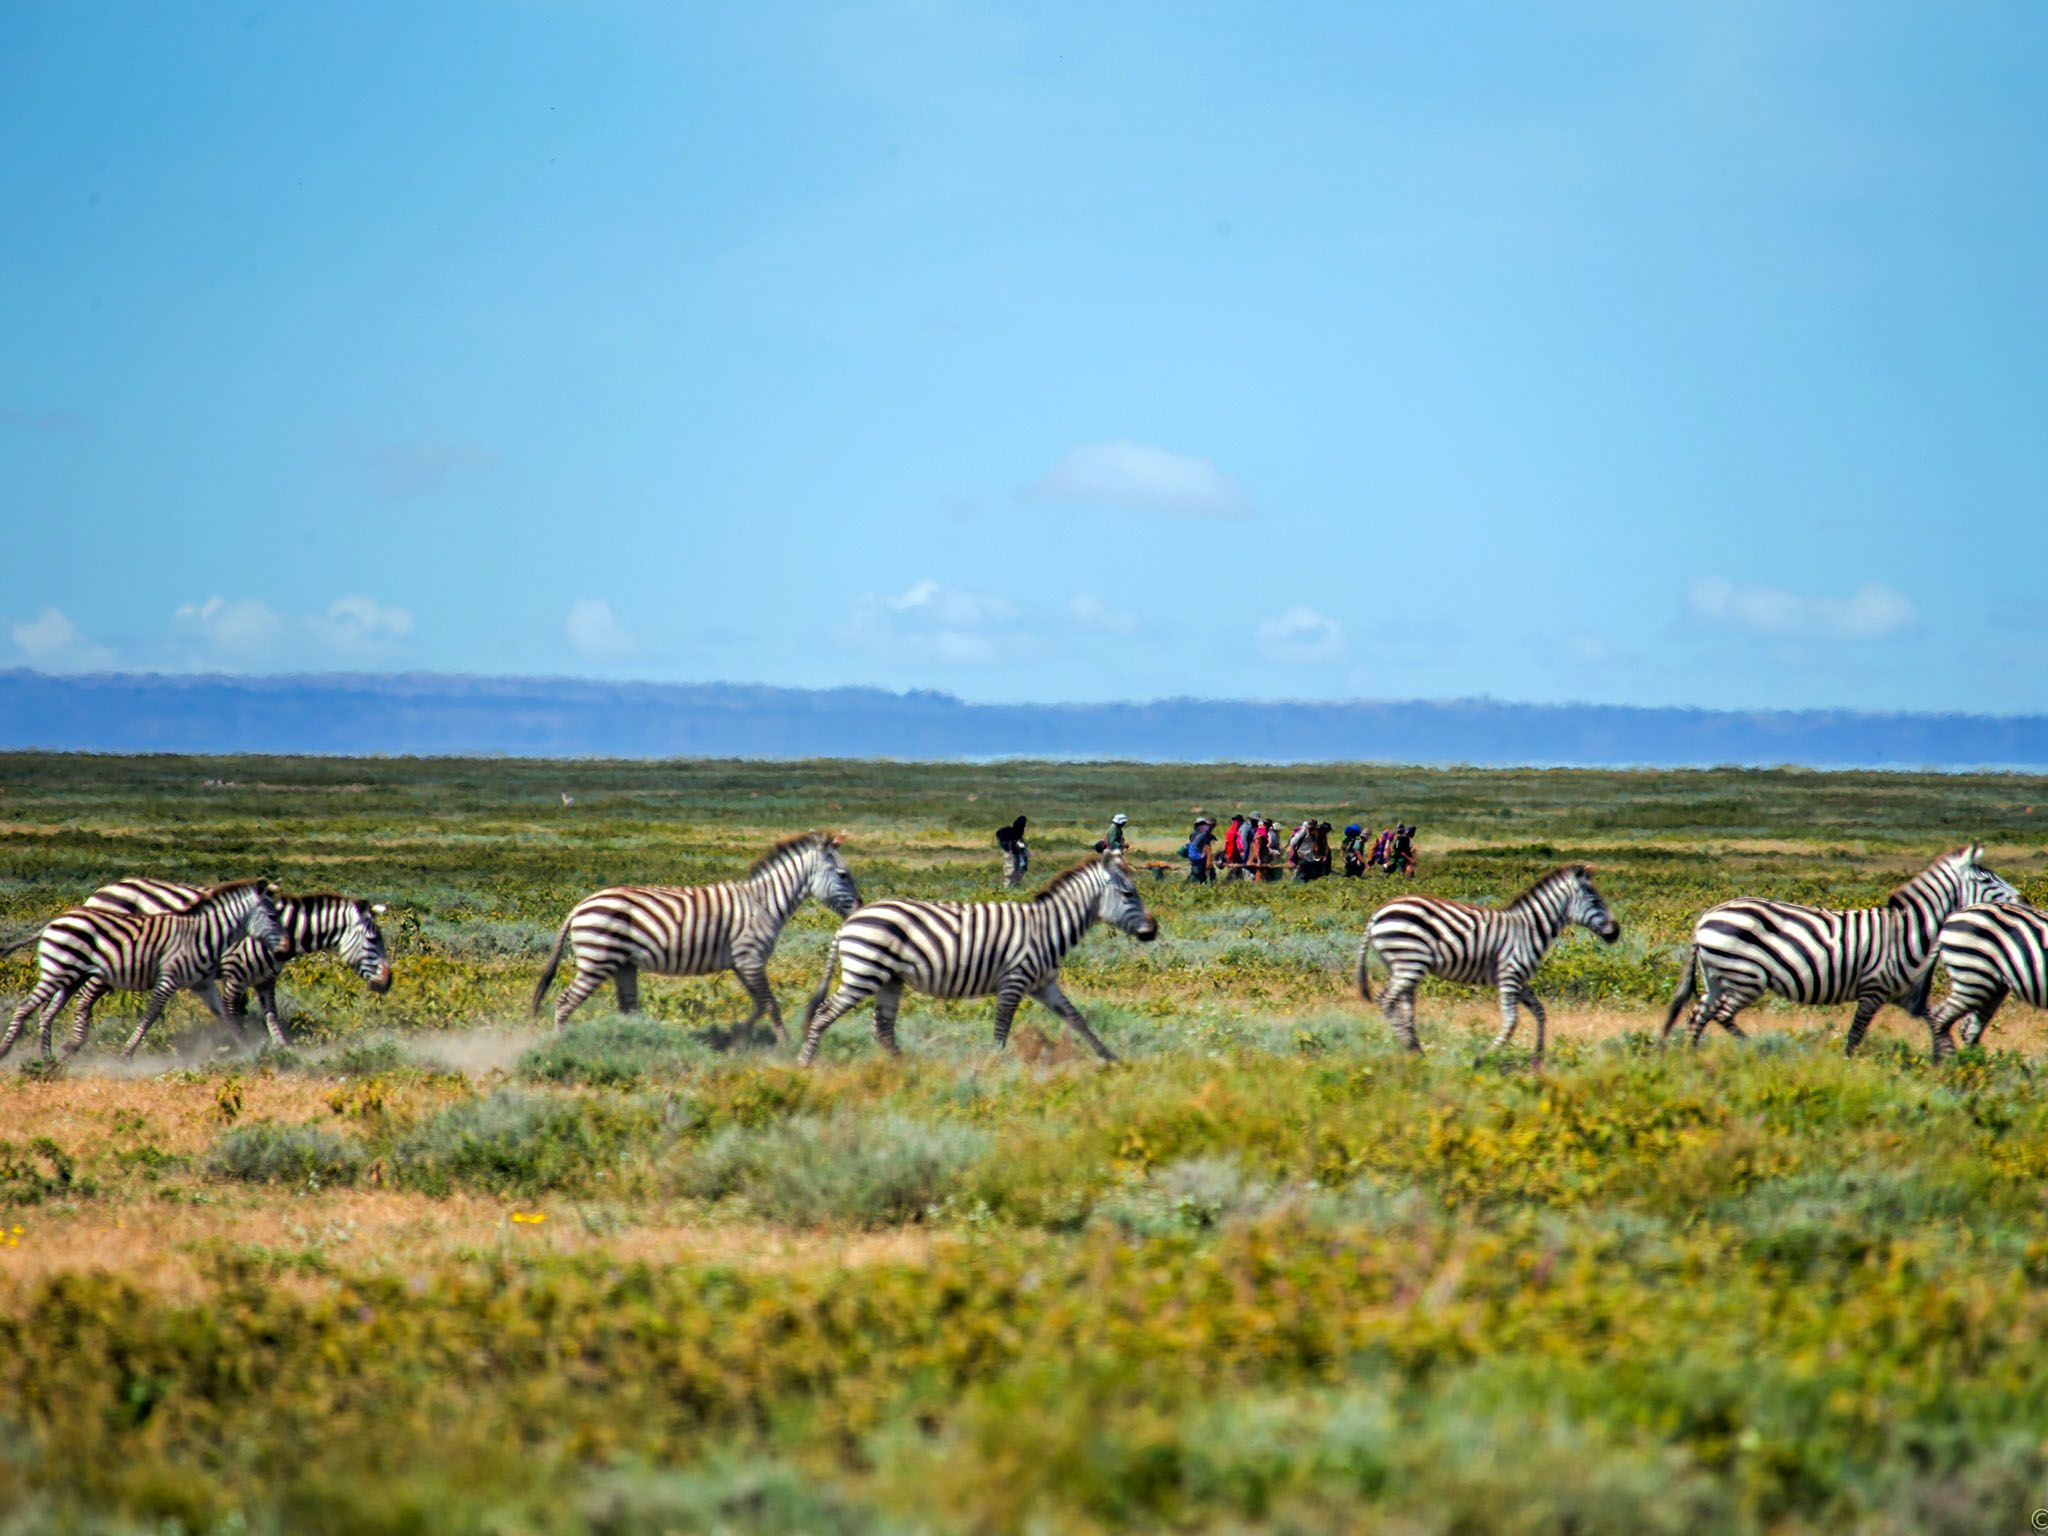 Tanzania, Africa: Extreme long shot of human herd migrating with a herd of zebras in middle... [Photo of the day - May 2016]